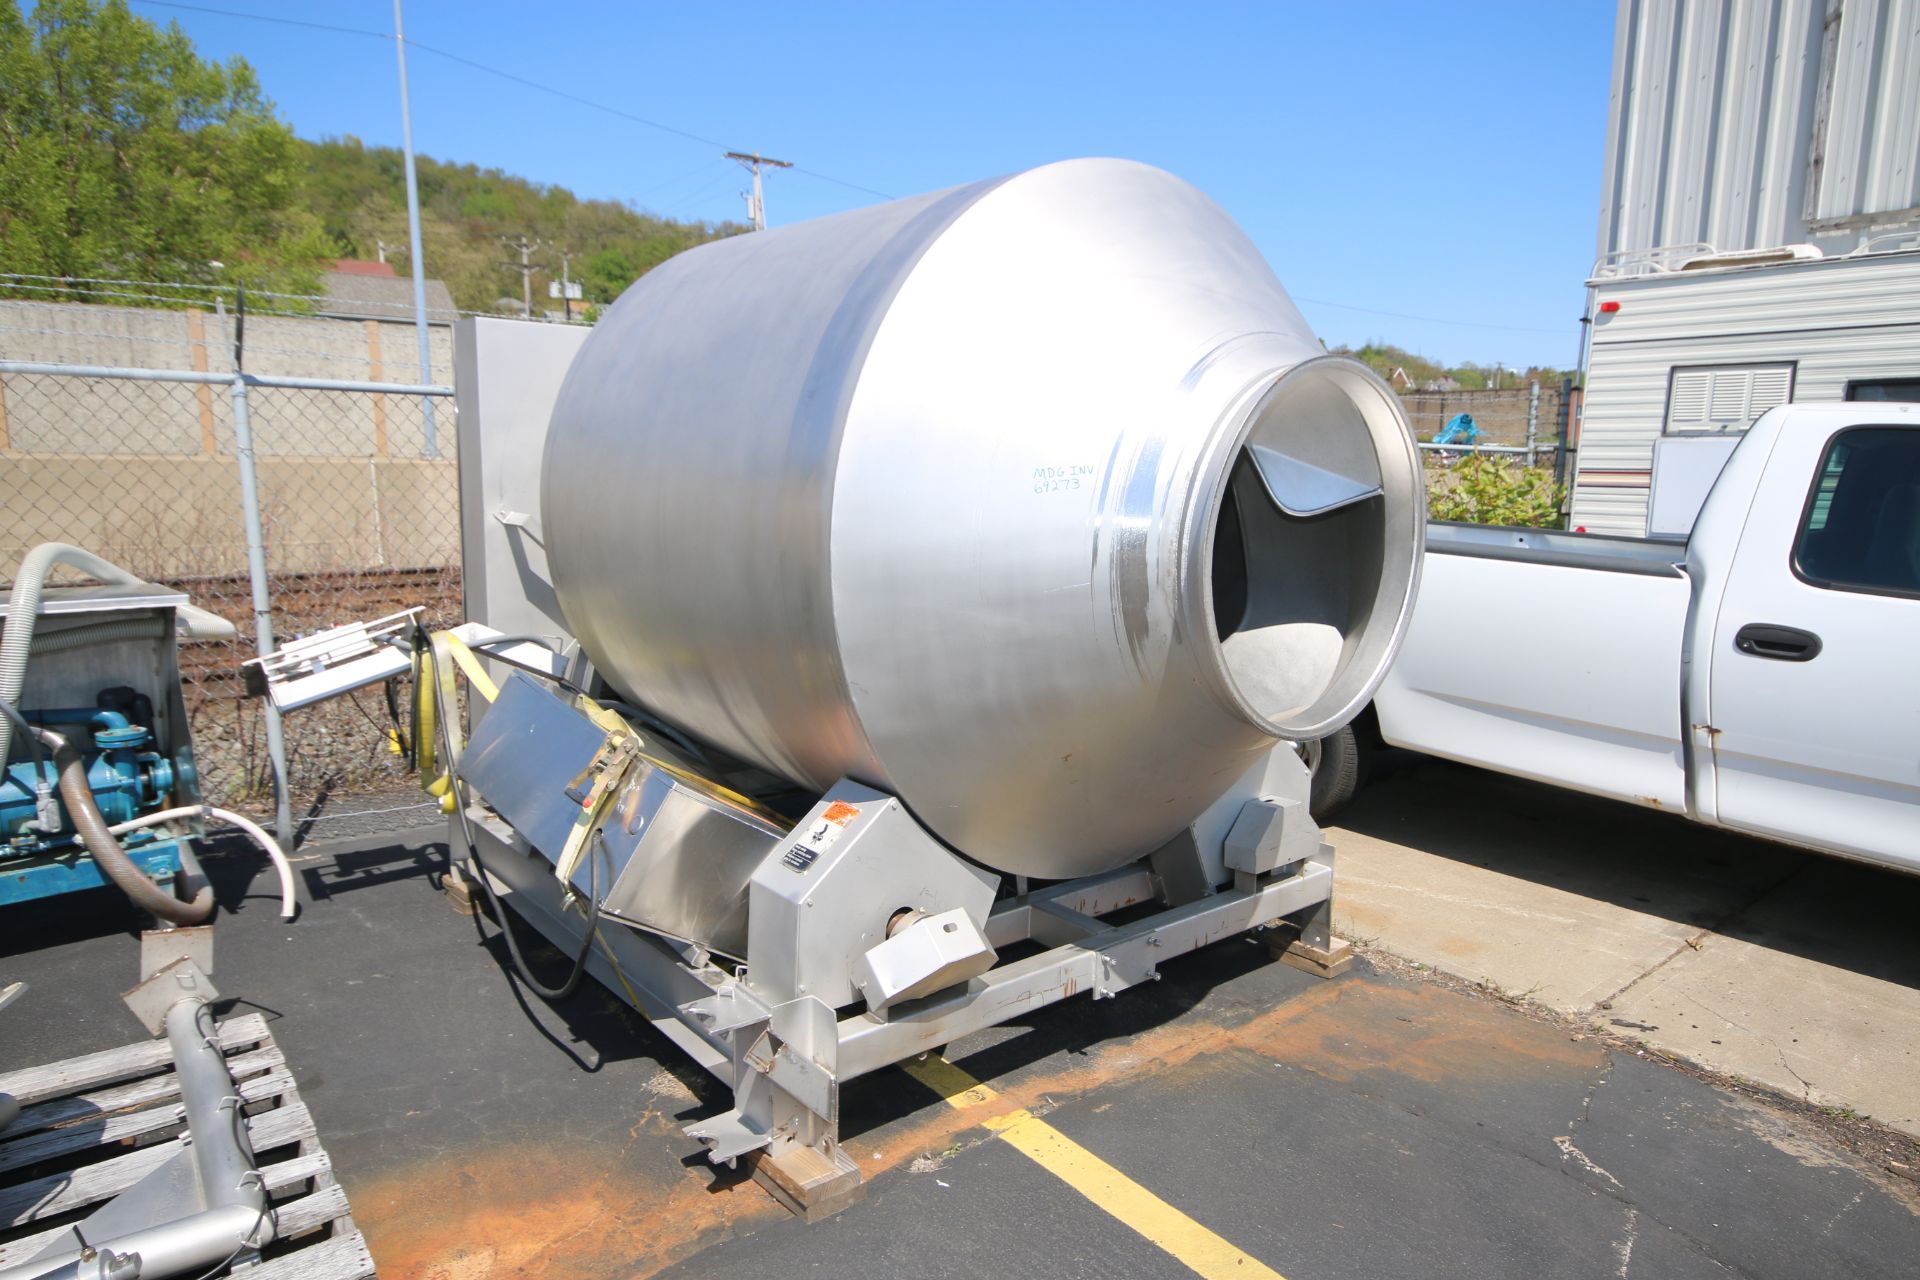 Blentech S/S Vacuum Tumbler, Model VT1-3000-S, S/N 970676 with Aprox. 8 ft. L x 67" W Tunnel